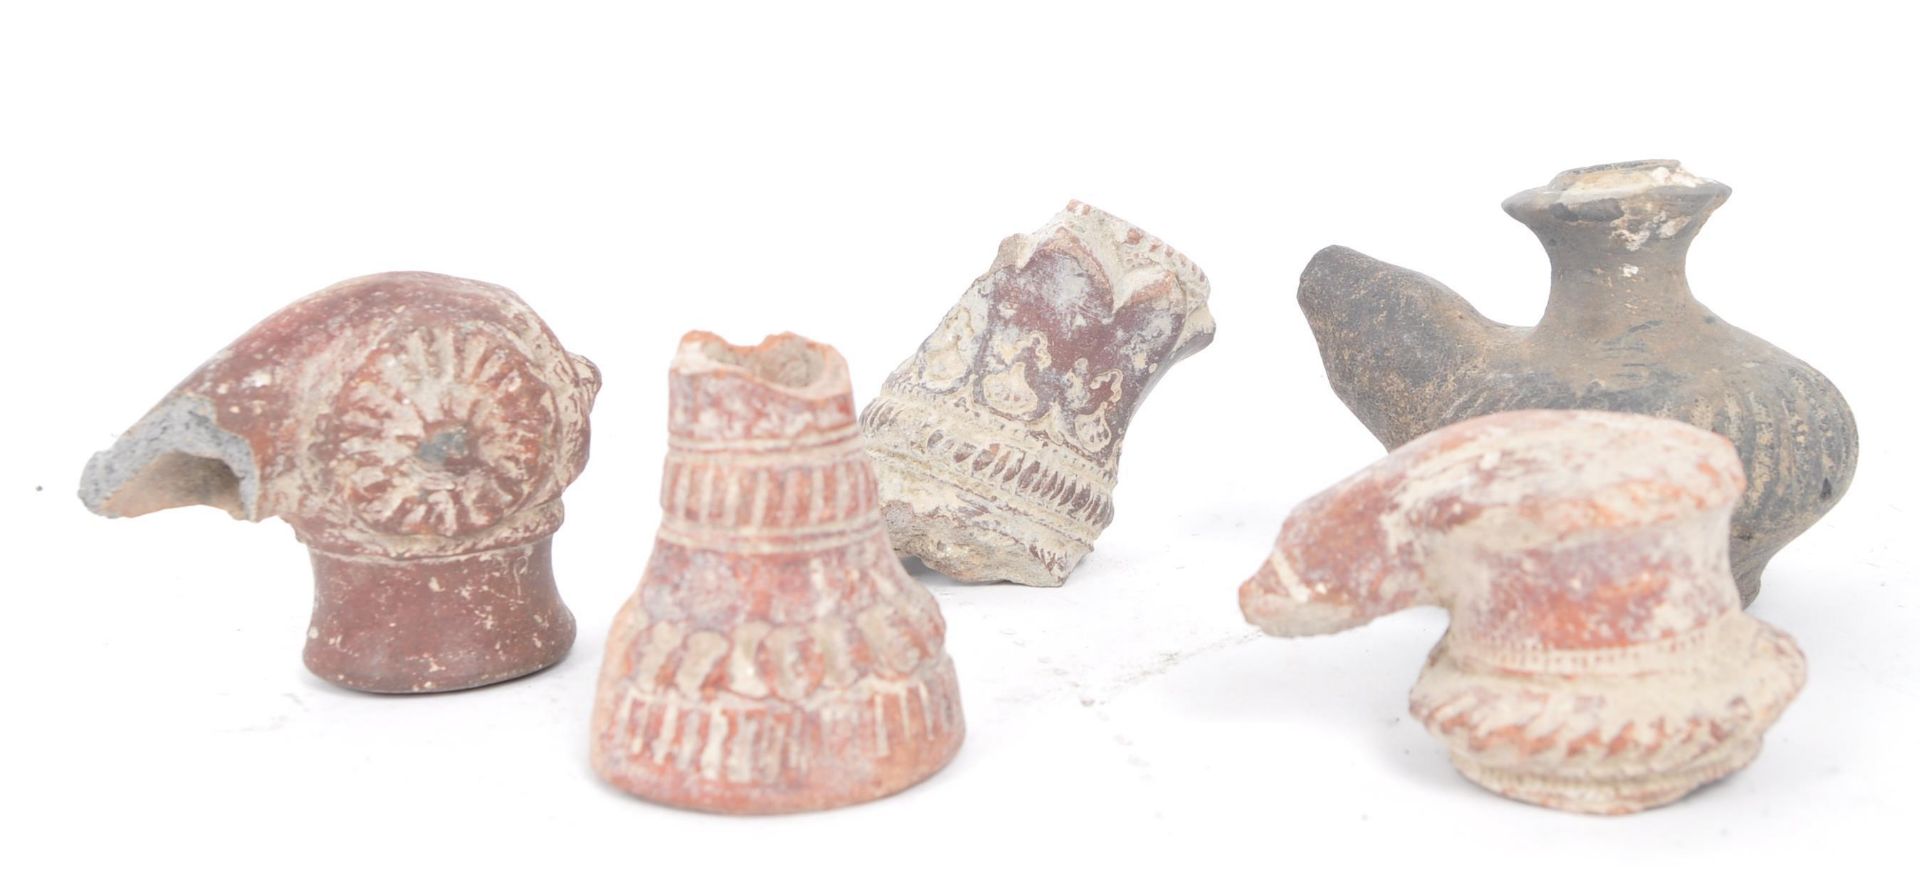 FIVE TERRACOTTA BELIEVED ROMAN PIPING PIECES / JUGS - Image 2 of 4